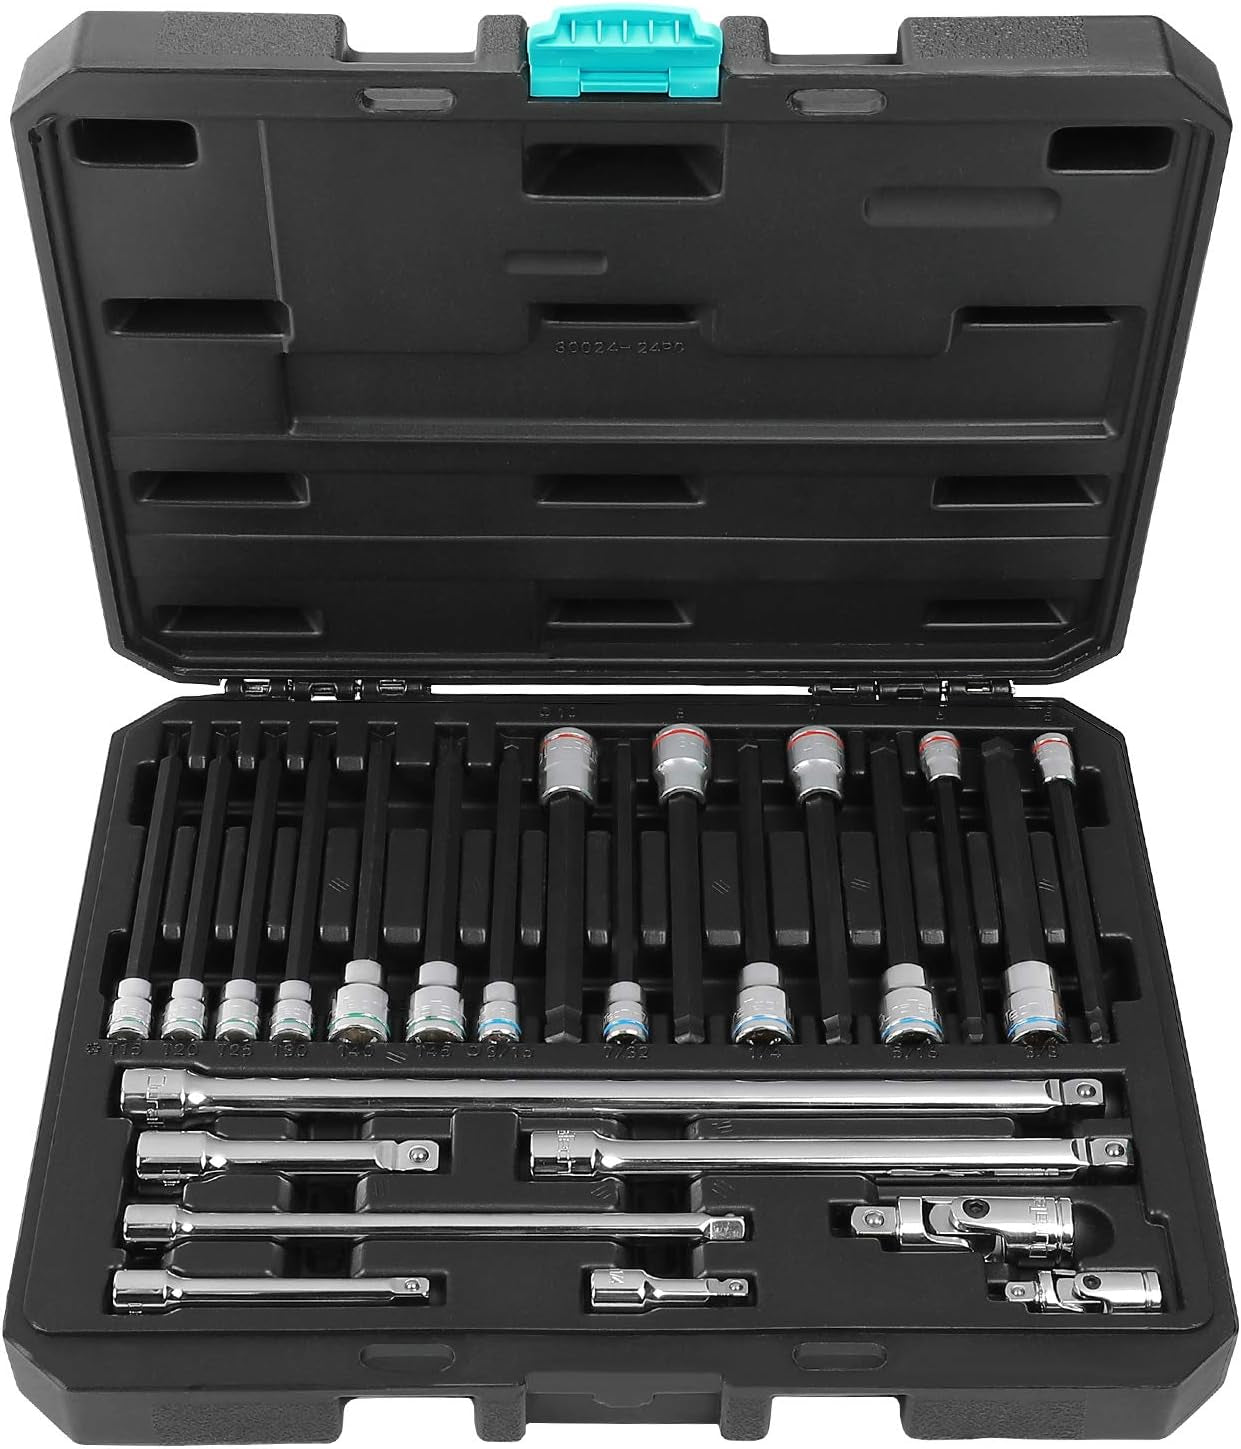 24-Piece Extra Long Bit Socket Set, 1/4'' and 3/8'' Drive, Torx and Allen Bit Sockets, with 6 Socket Extension Bars, 2 Universal Joints, Molded Case Included